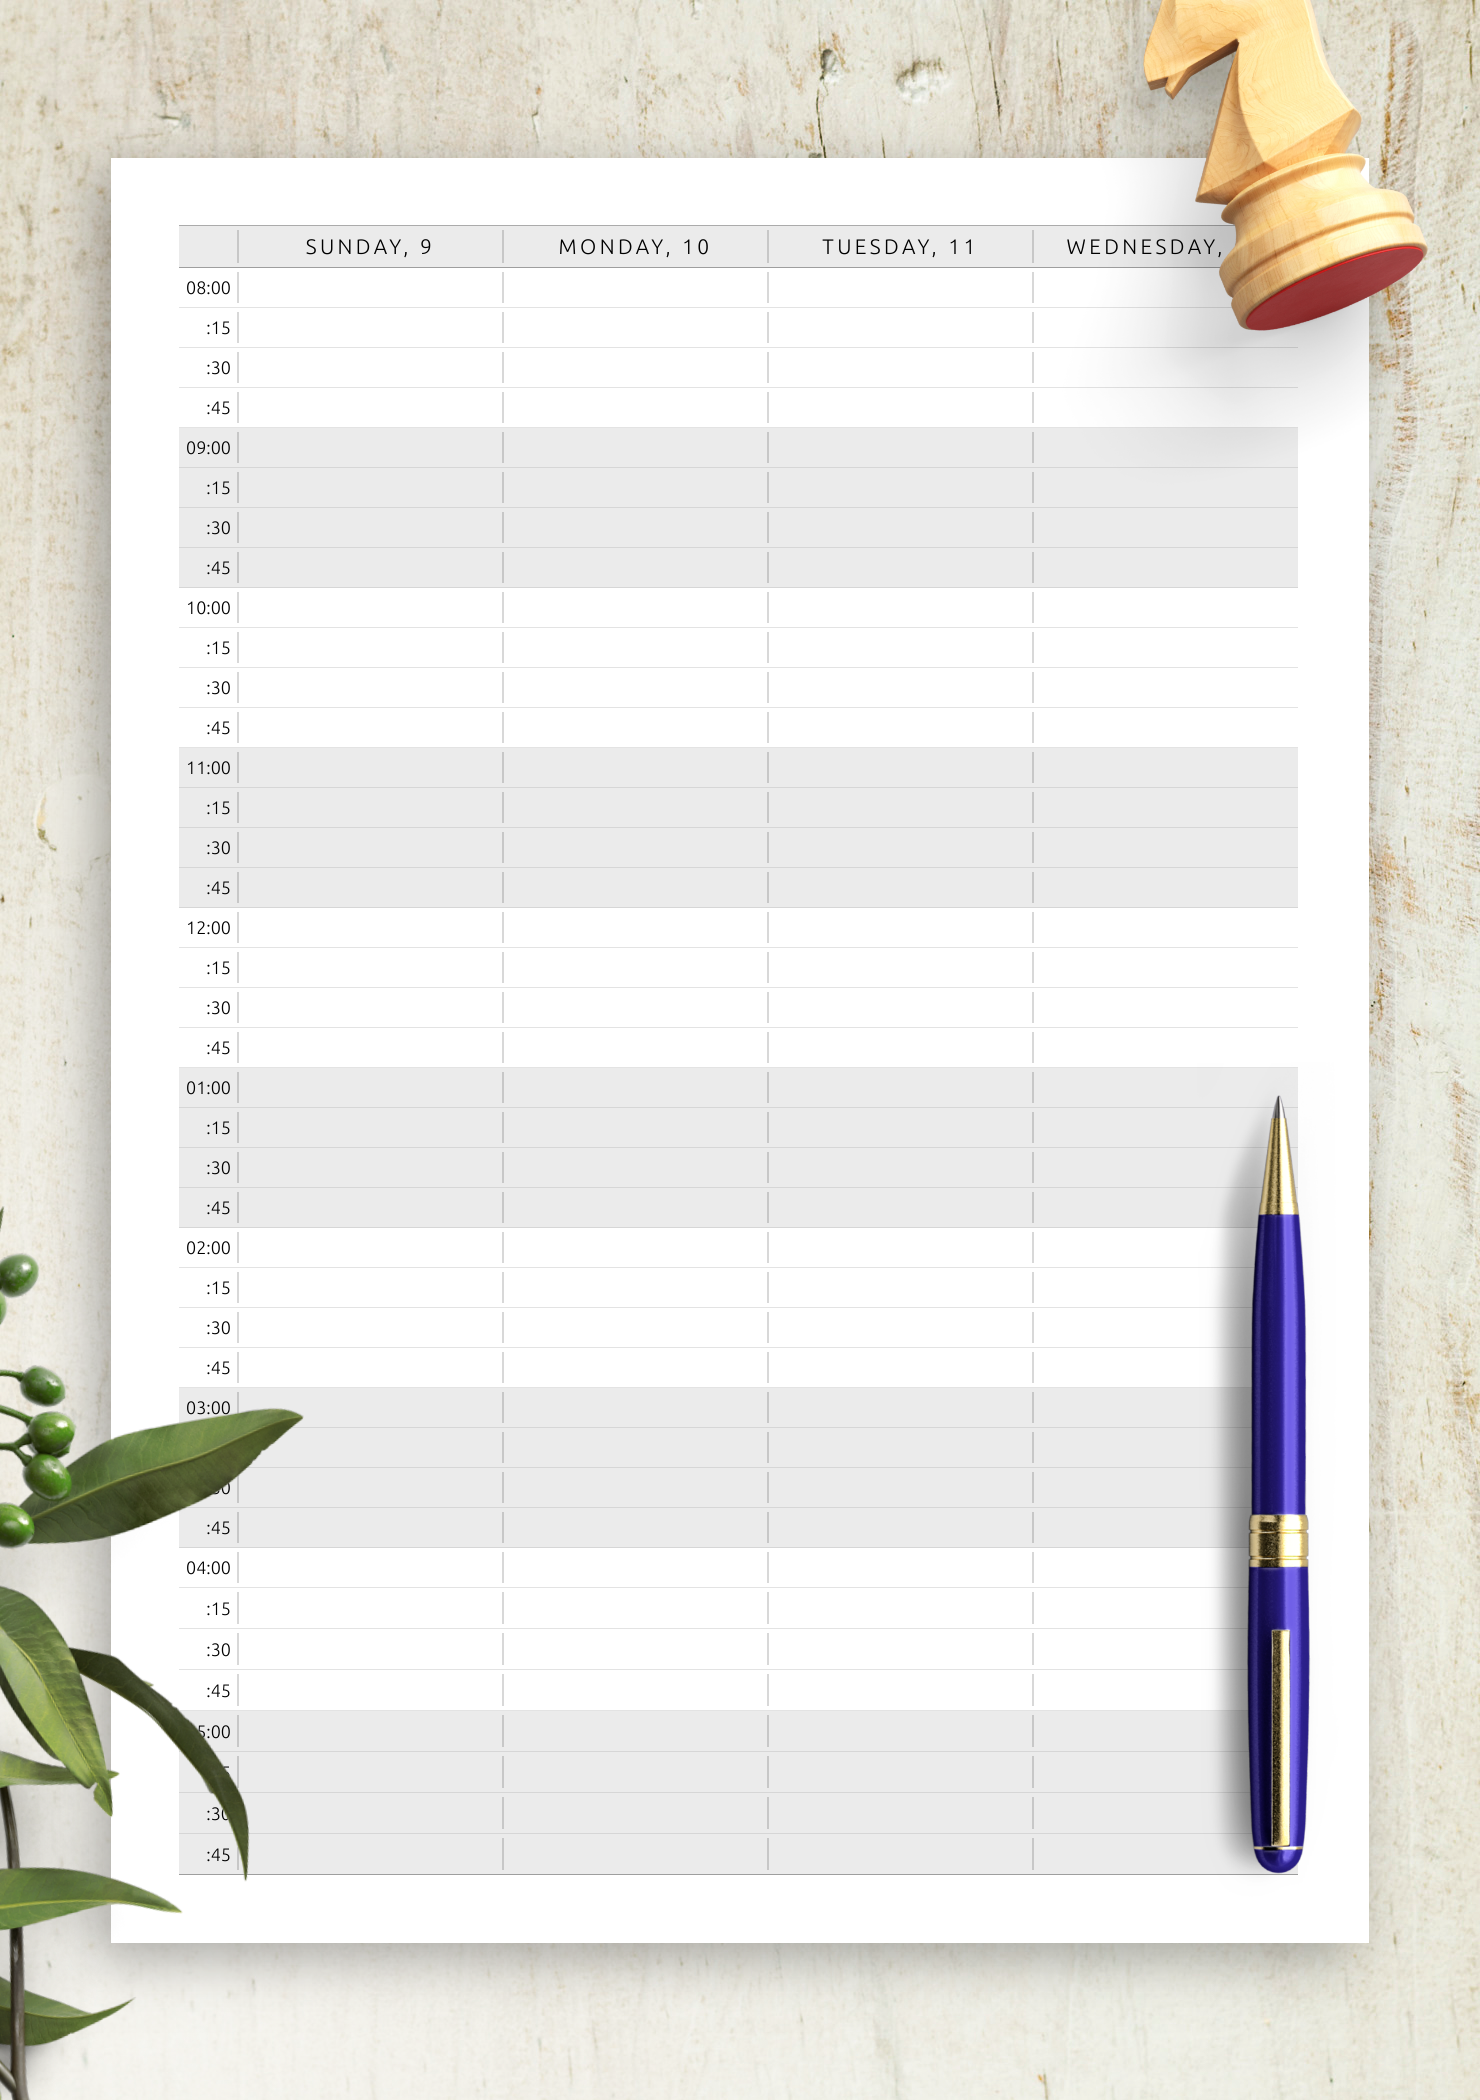 Download Printable Appointment Calendar Template Vertical Two Page